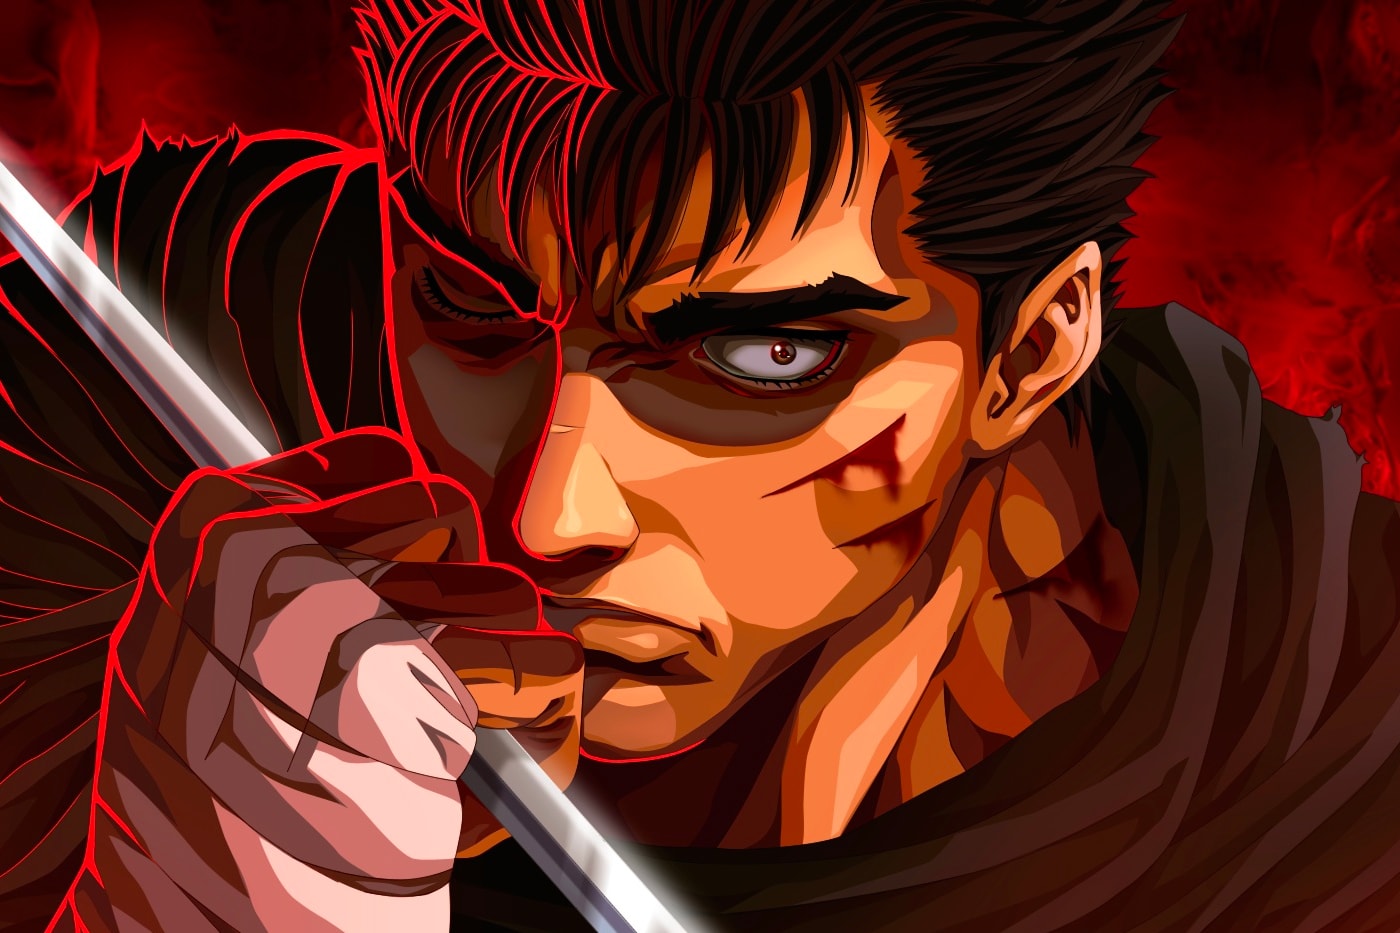 Berserk: 5 Reasons Why The 90s Anime Is The Best Adaptation (& 5